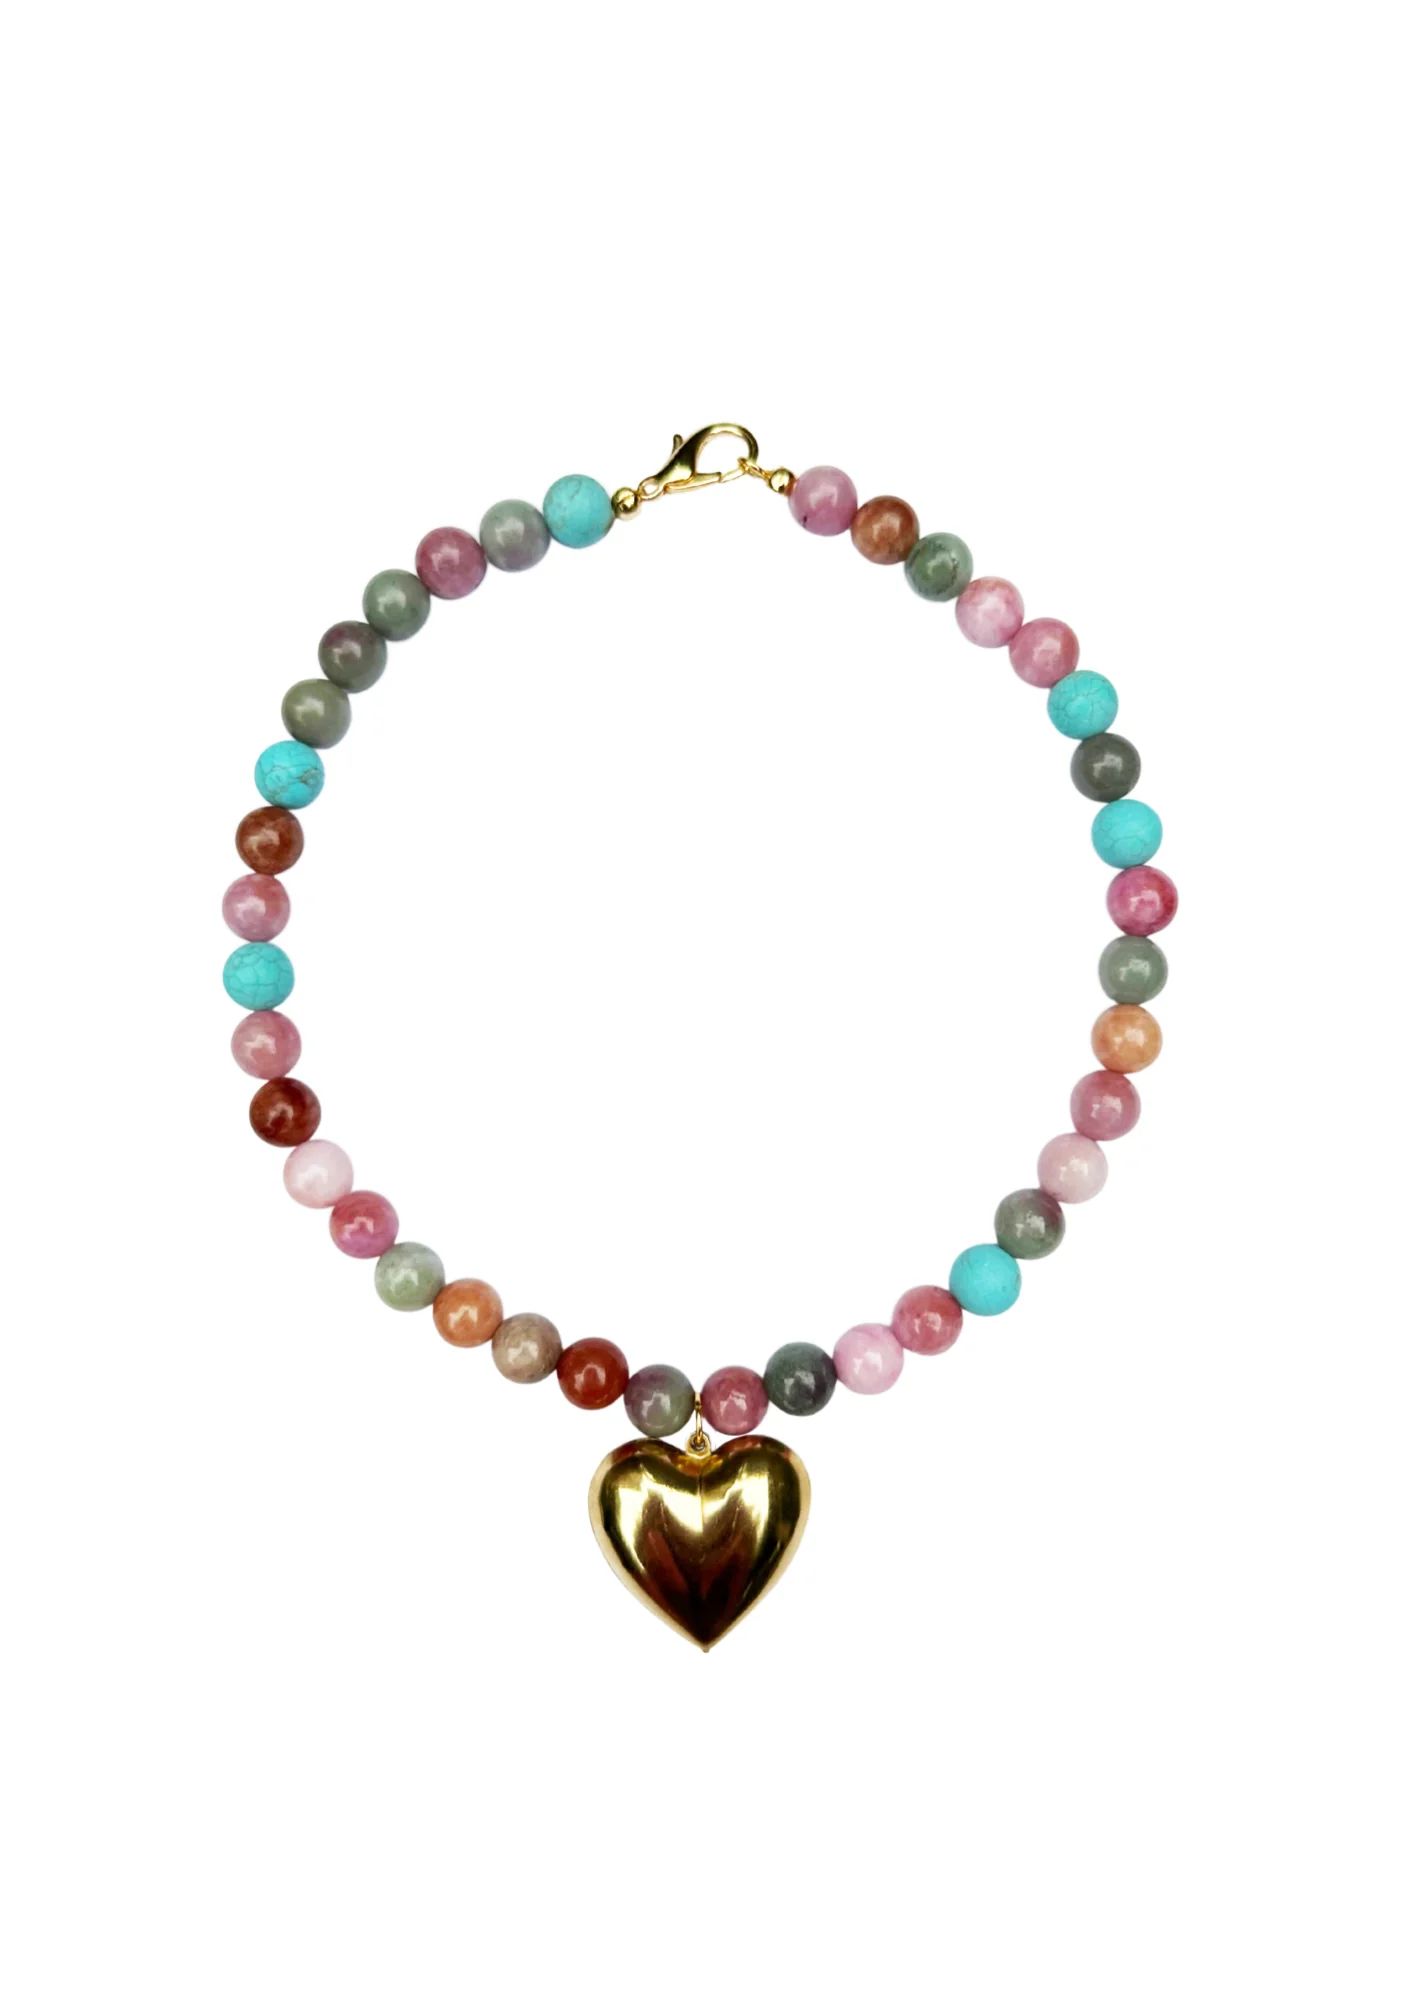 Limited Edition: Multicolored Bead and Heart Pendant Necklace | Nicola Bathie Jewelry